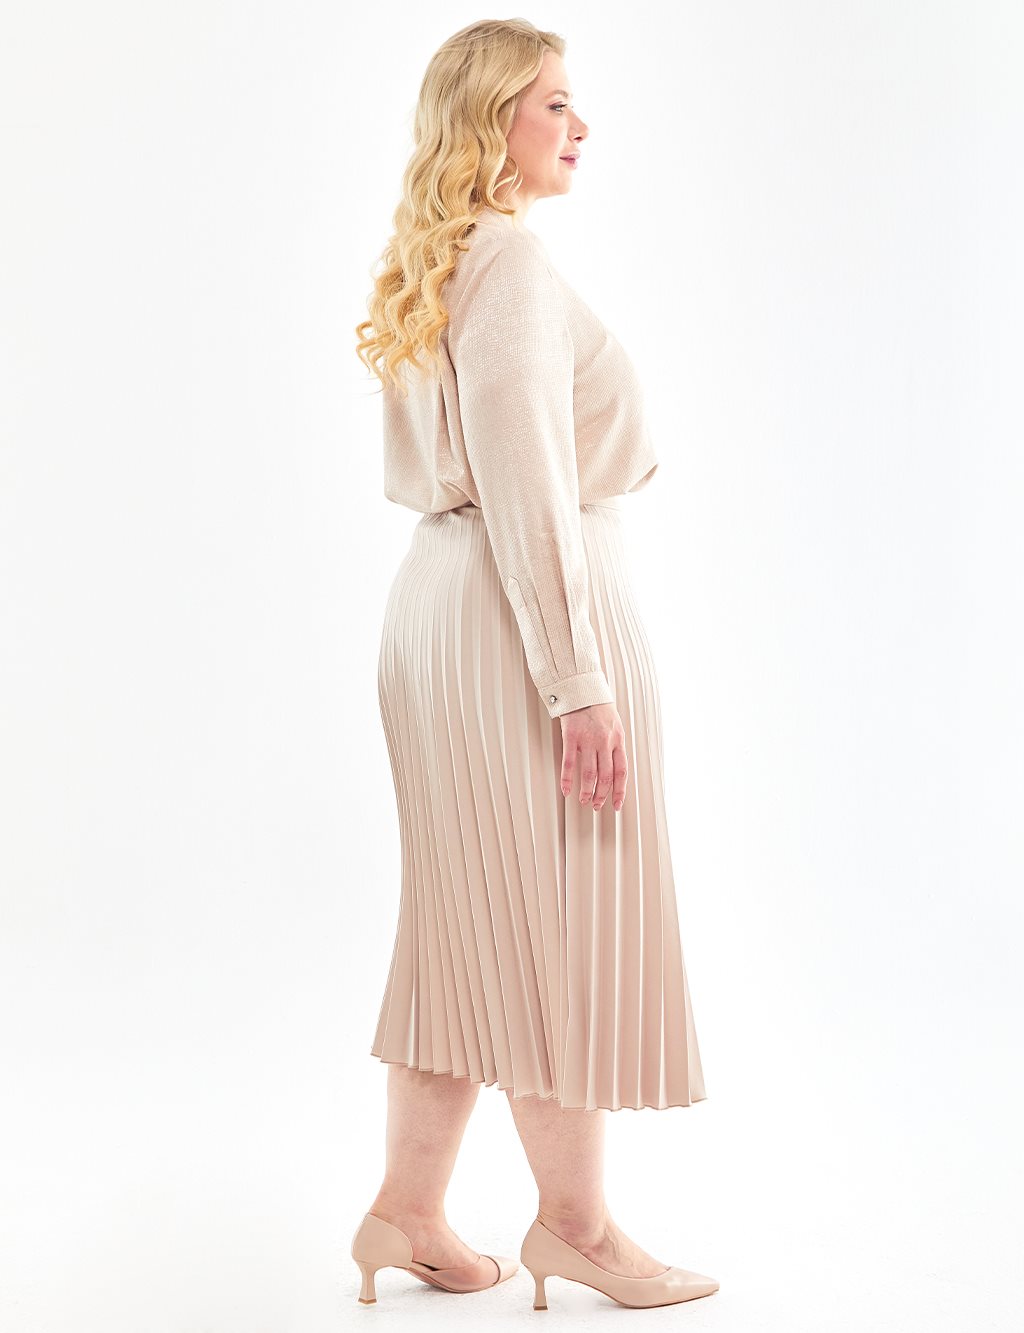 Pleated A-line Skirt Beige